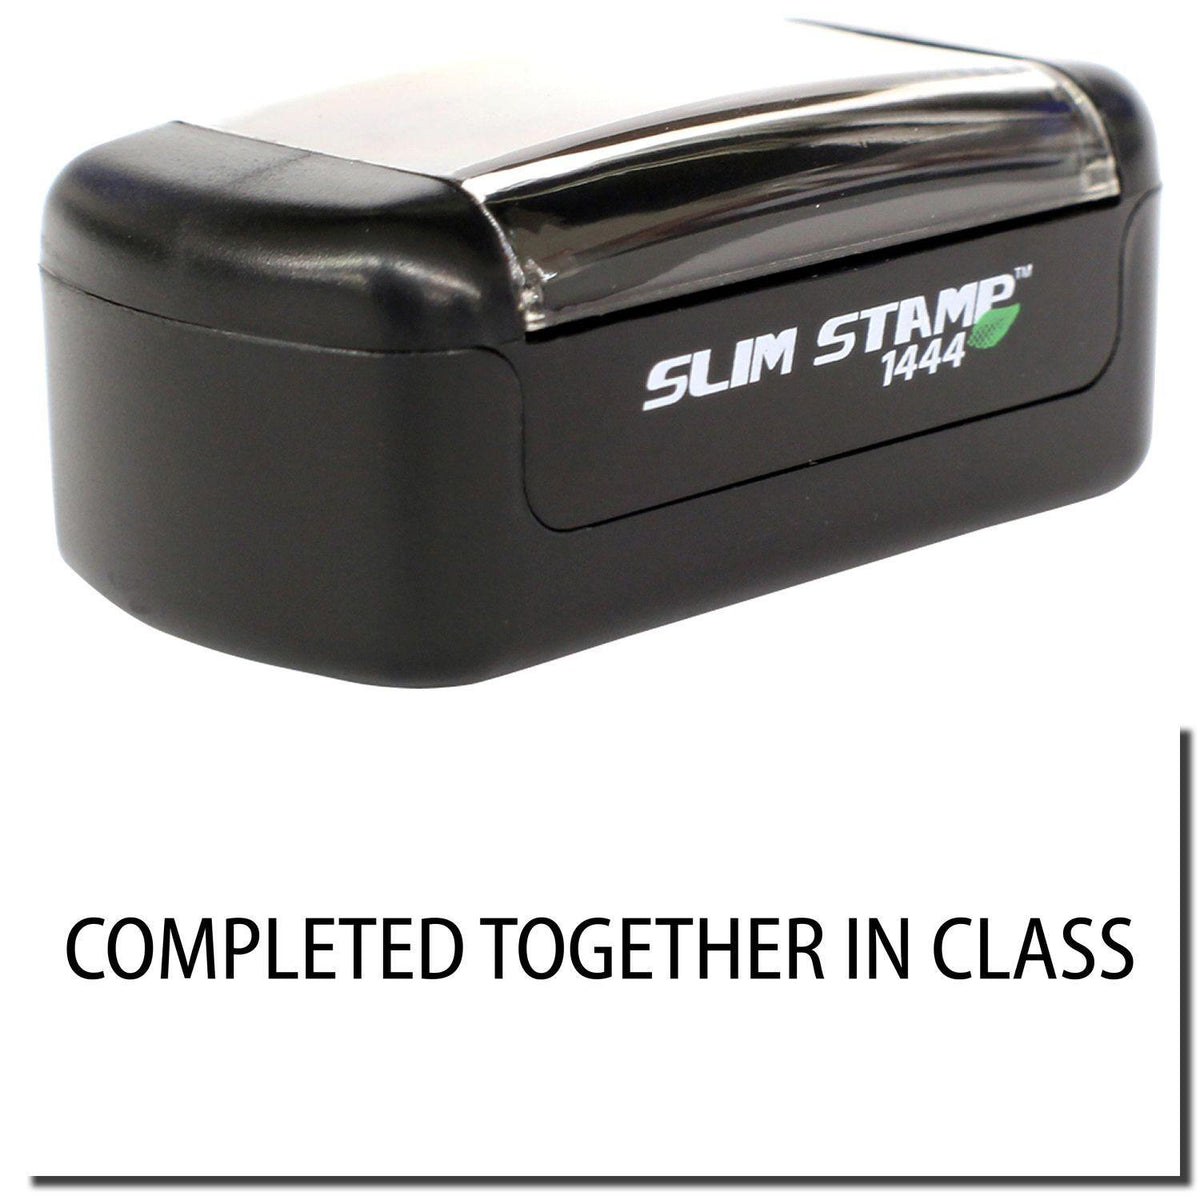 A stock office pre-inked stamp with a stamped image showing how the text &quot;COMPLETED TOGETHER IN CLASS&quot; is displayed after stamping.